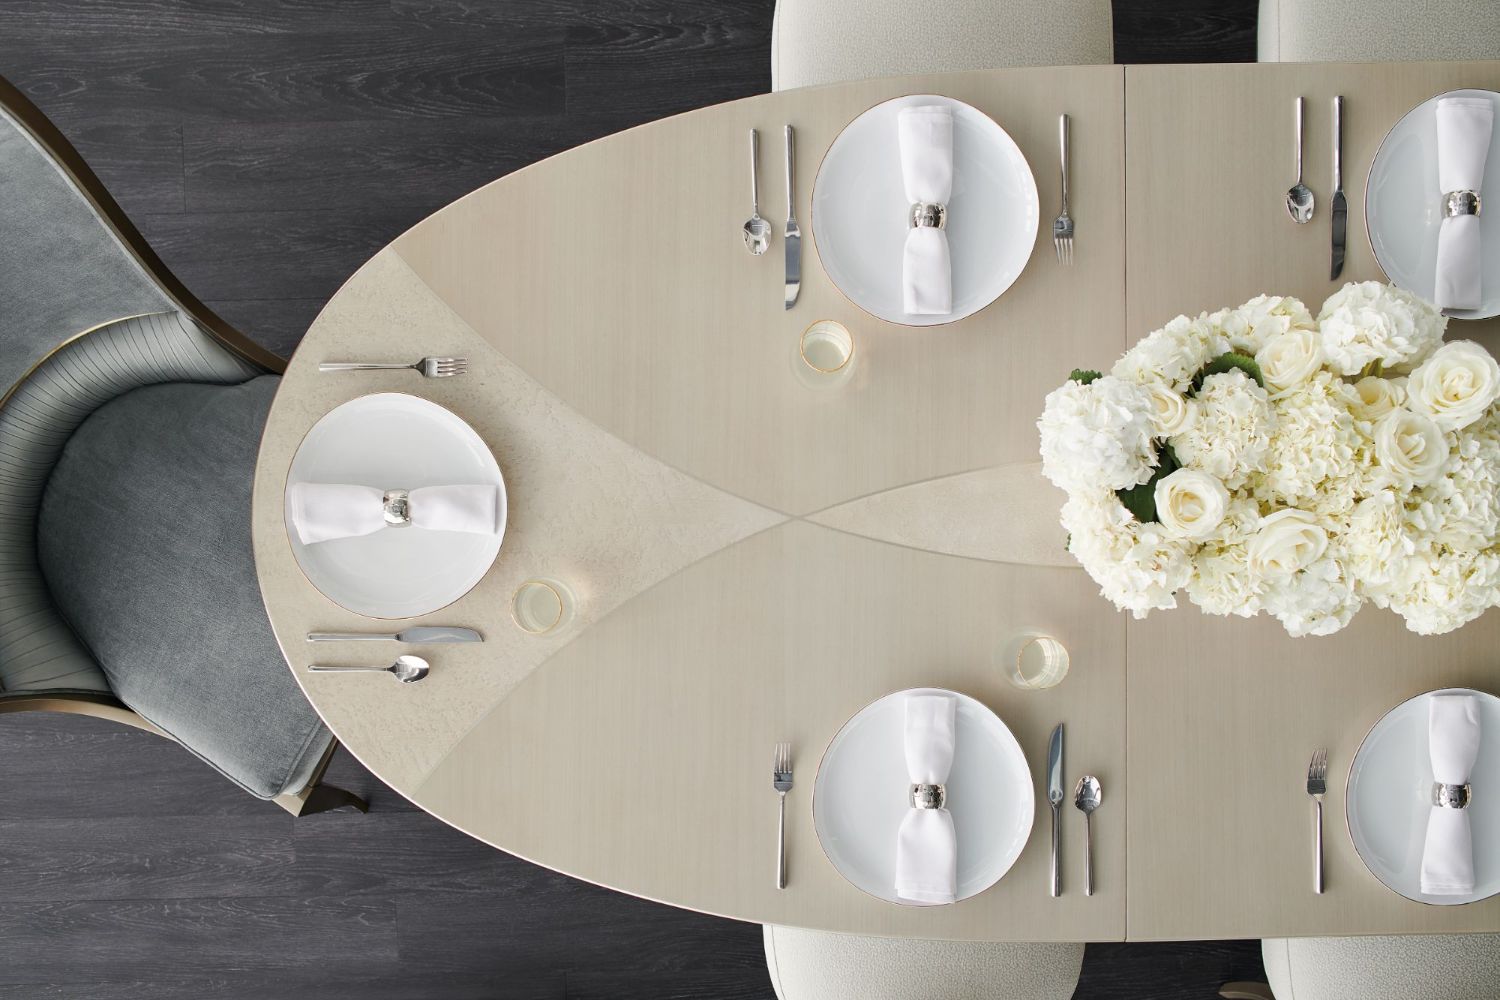 Caracole Classic The Source Dining Table